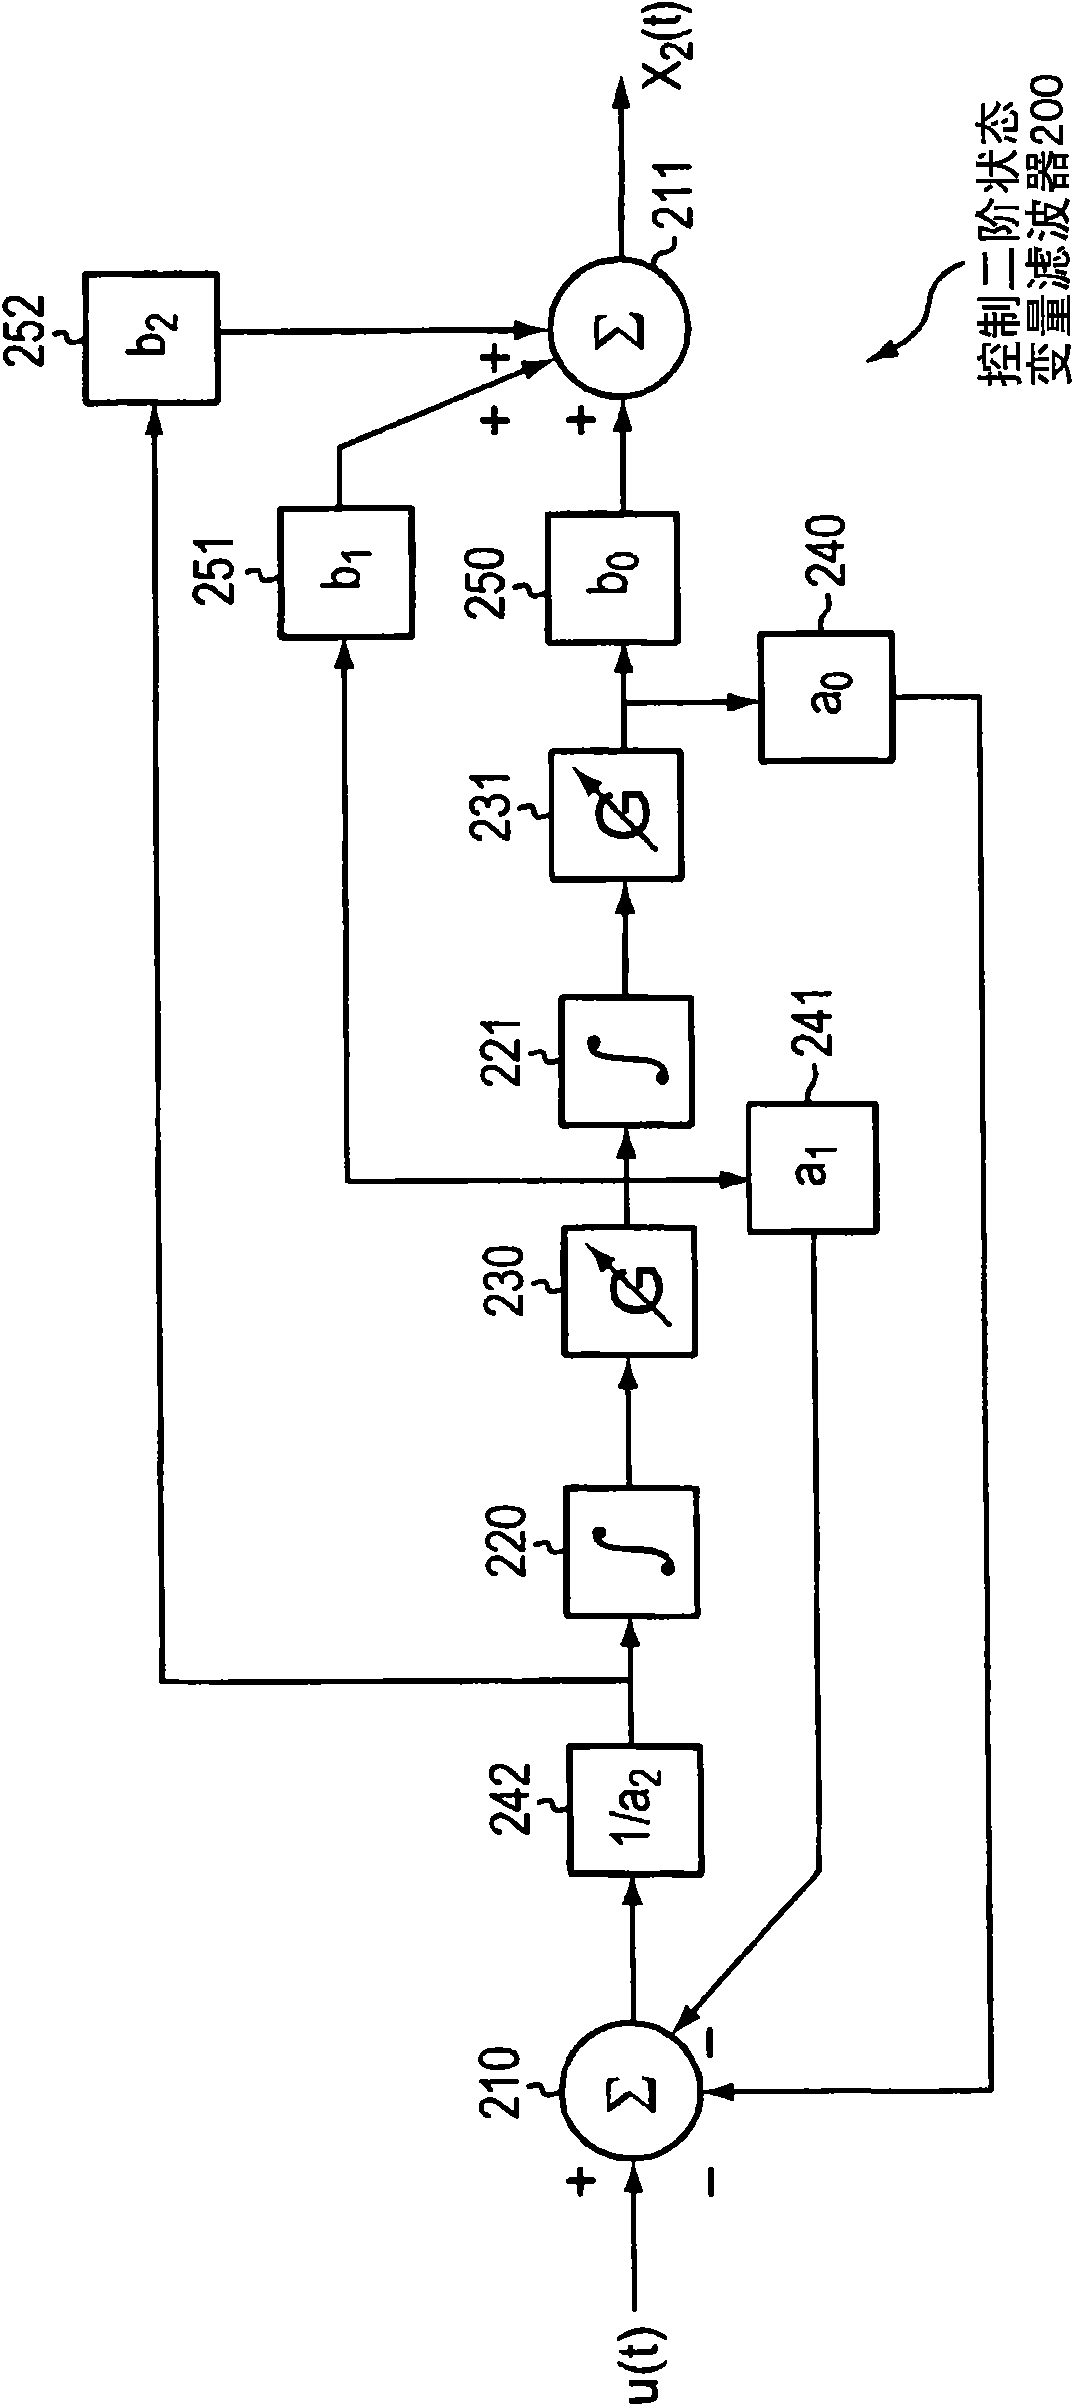 Method, system, and apparatus for wideband signal processing